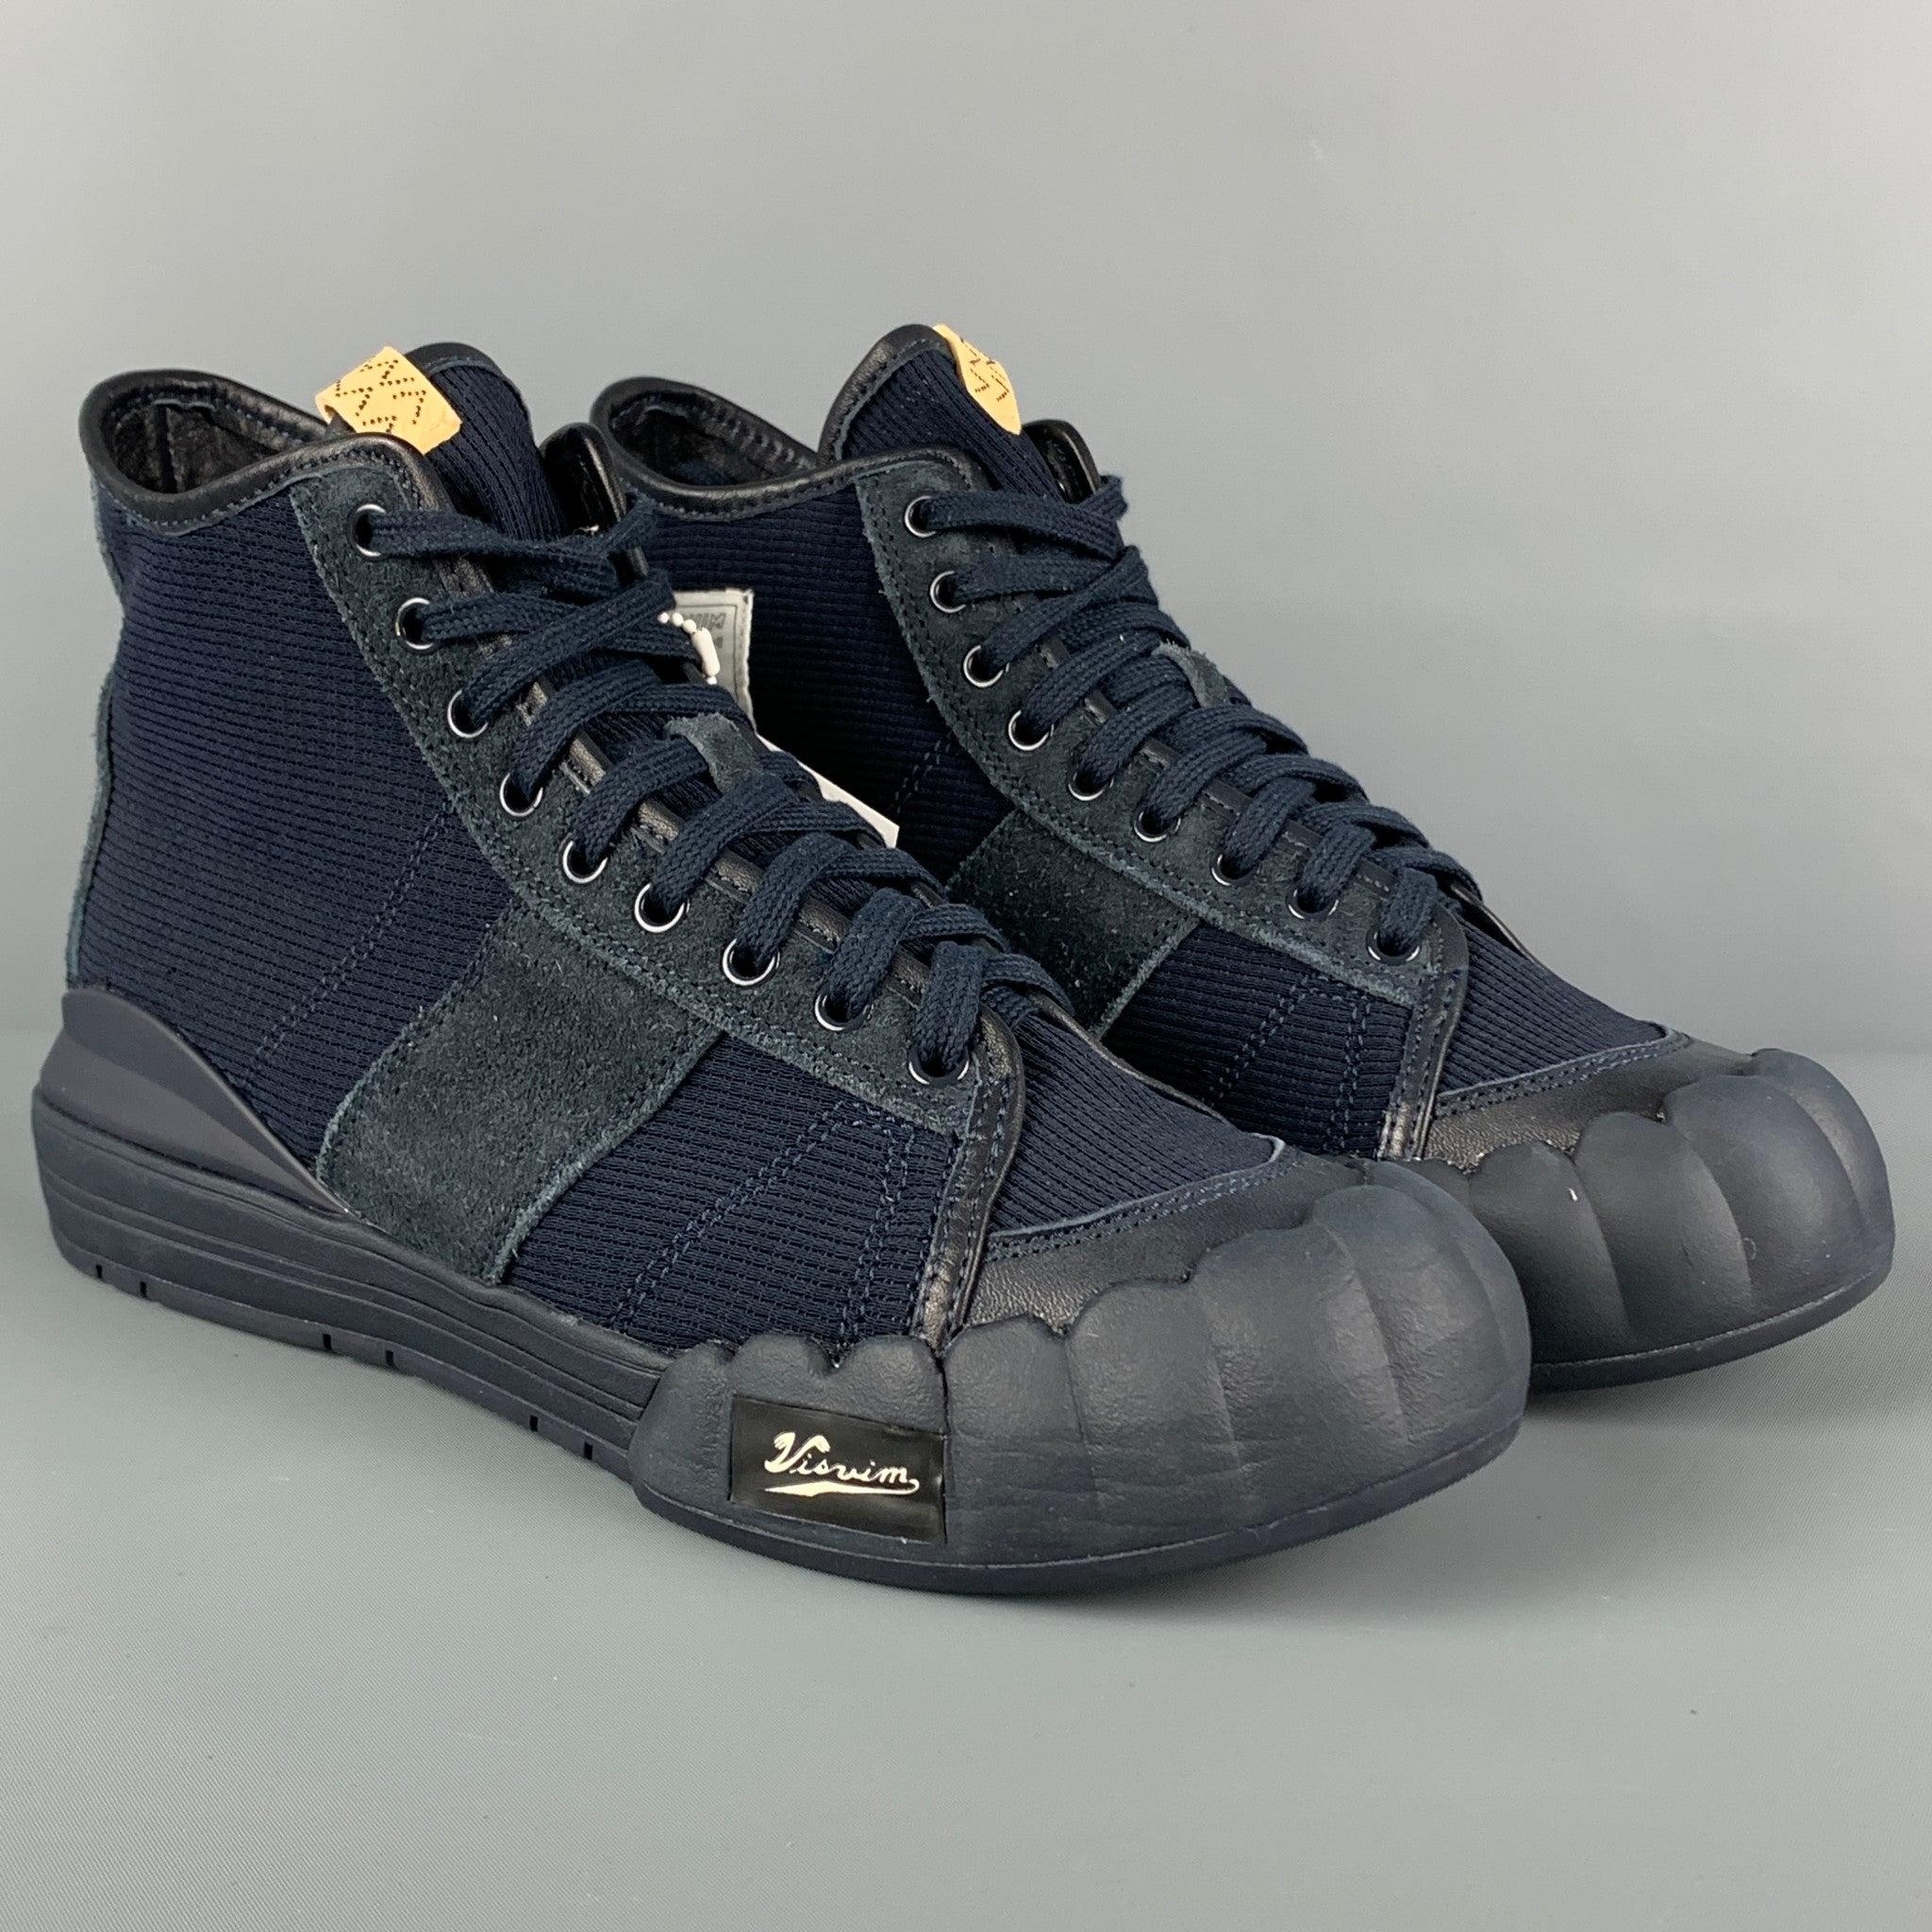 VISVIM 'Lanier' sneakers comes in a navy paneled rib knit with a leather and suede trim throughout featuring a high-top style, rubberized to and heel, leather lining, and a lace up closure.
New With Box.
 

Marked:   10.5Outsole: 12 inches  x 4